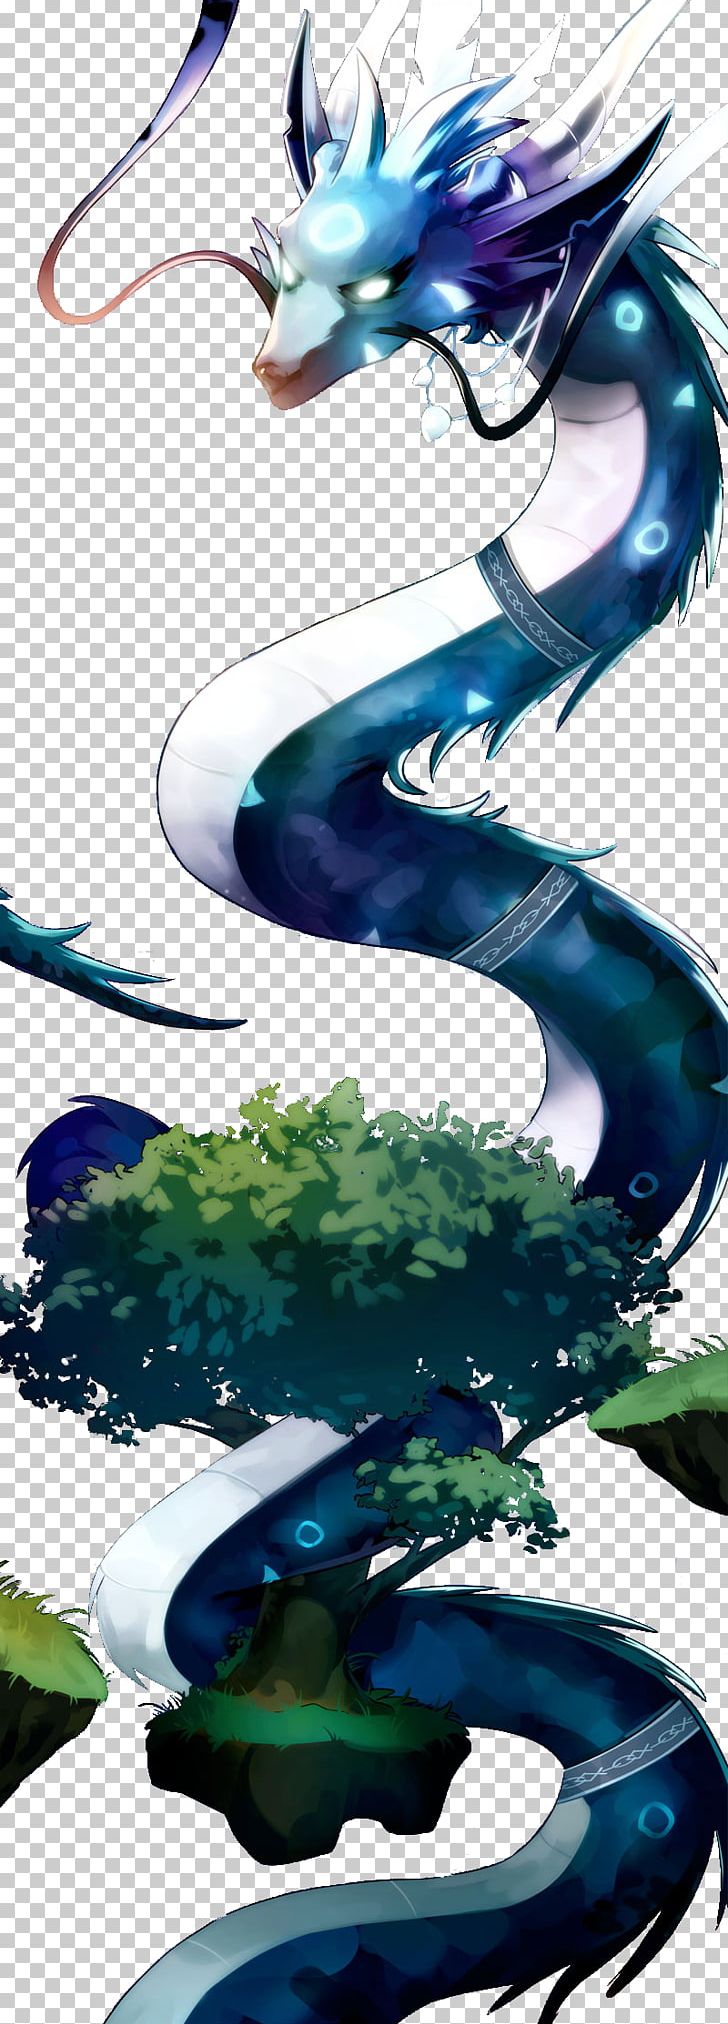 Transformice Dragon Wikia Atelier 801 PNG, Clipart, 2016, Anime, Art, Atelier 801, Automotive Design Free PNG Download